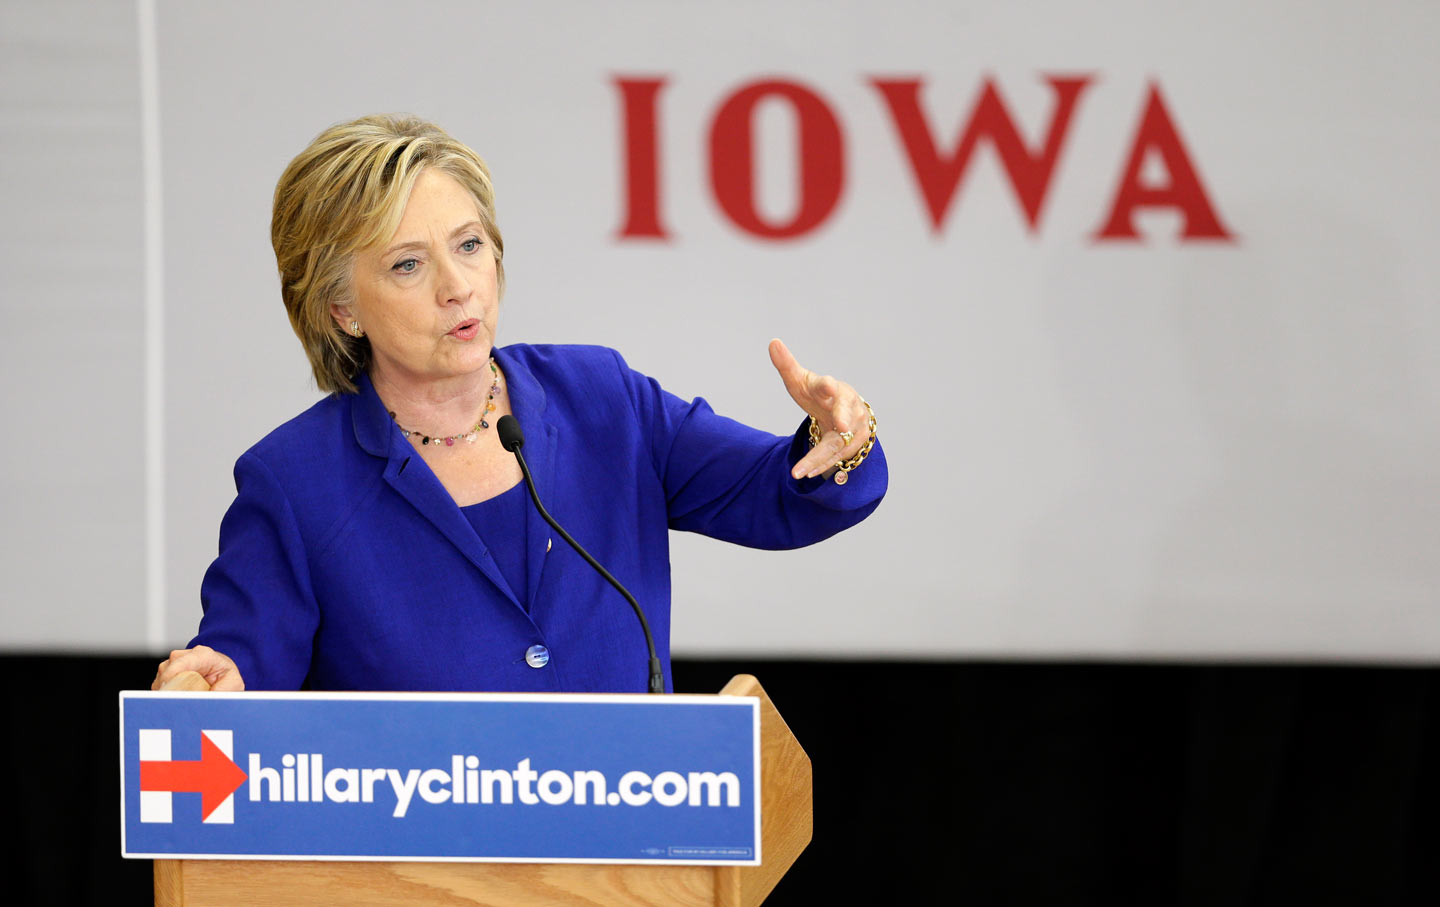 Hillary Clinton Lands a Key Endorsement From the League of Conservation Voters